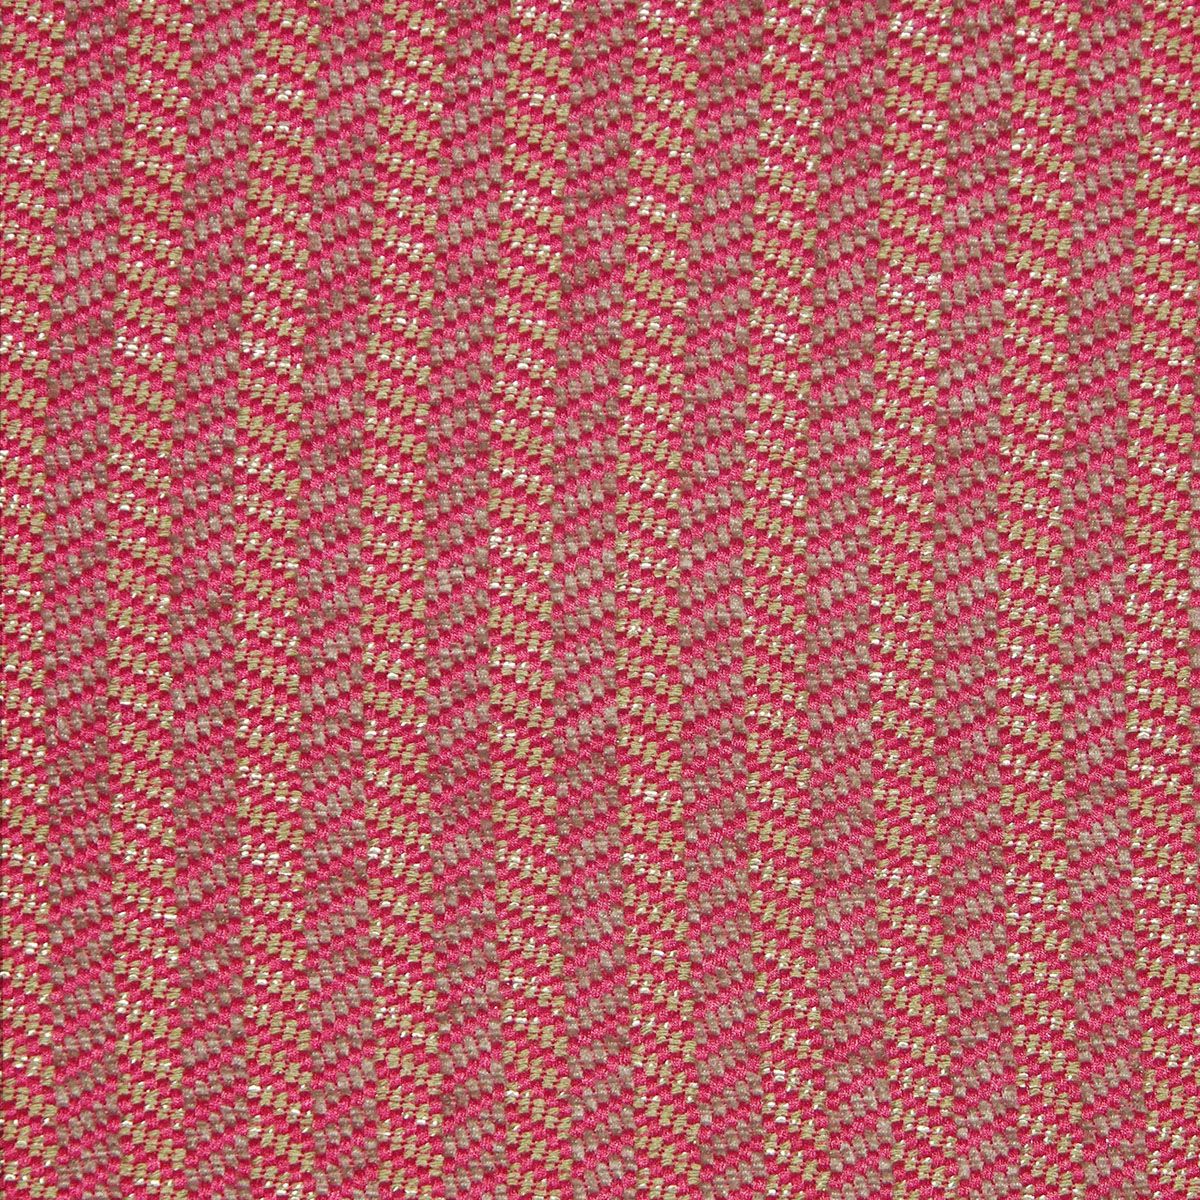 Herring fabric in red herring color - pattern number VC 00160602 - by Scalamandre in the Old World Weavers collection